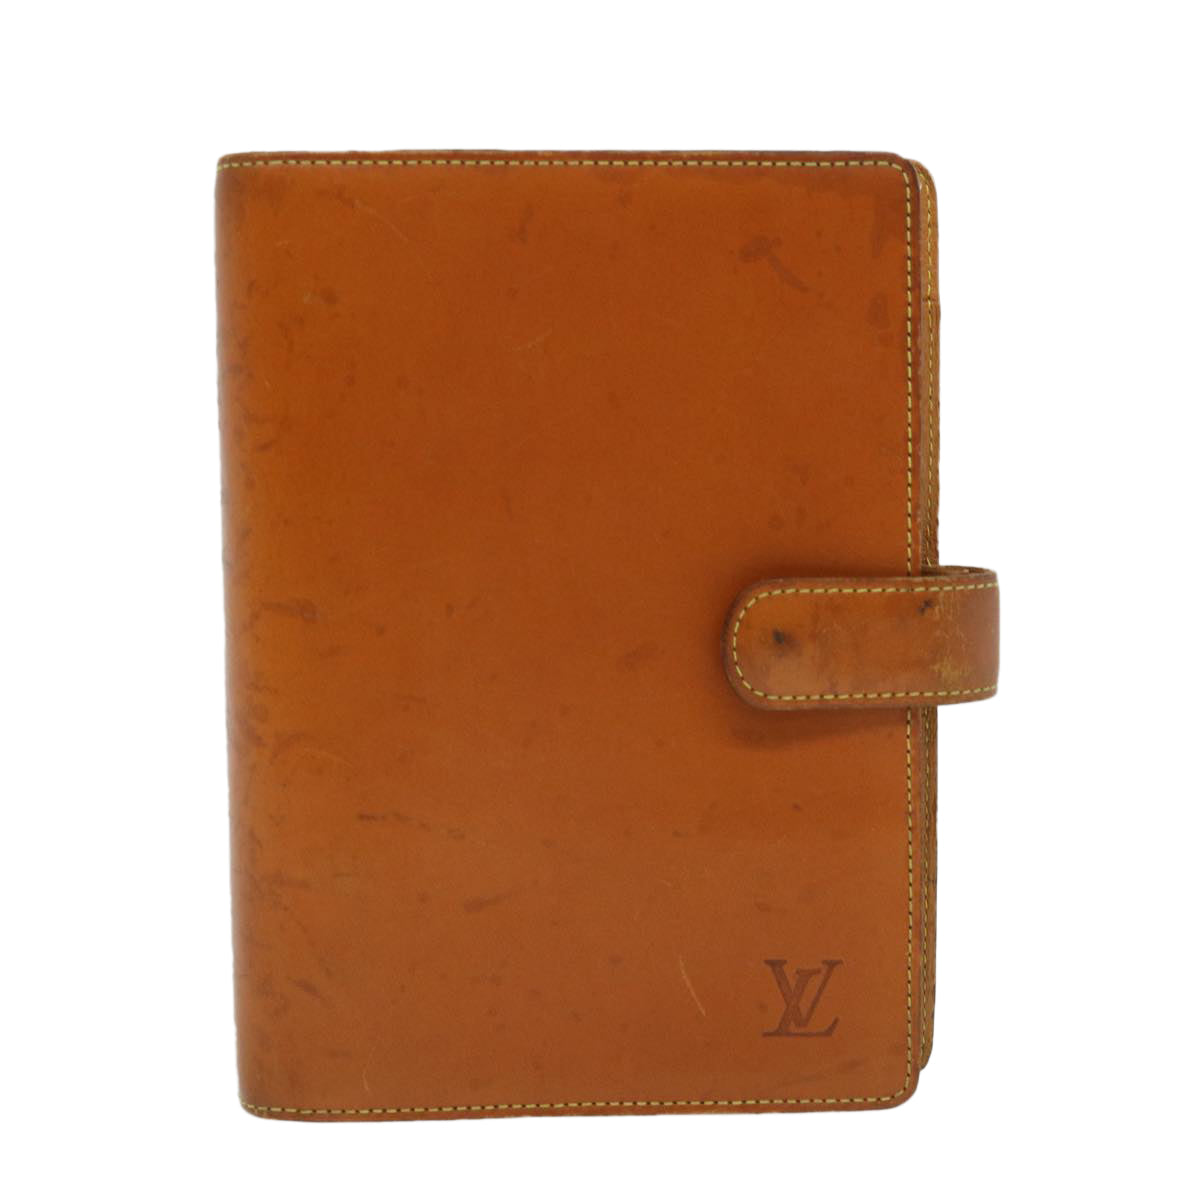 LOUIS VUITTON Nomad Agenda MM Day Planner Cover Brown R20105 LV Auth 32099